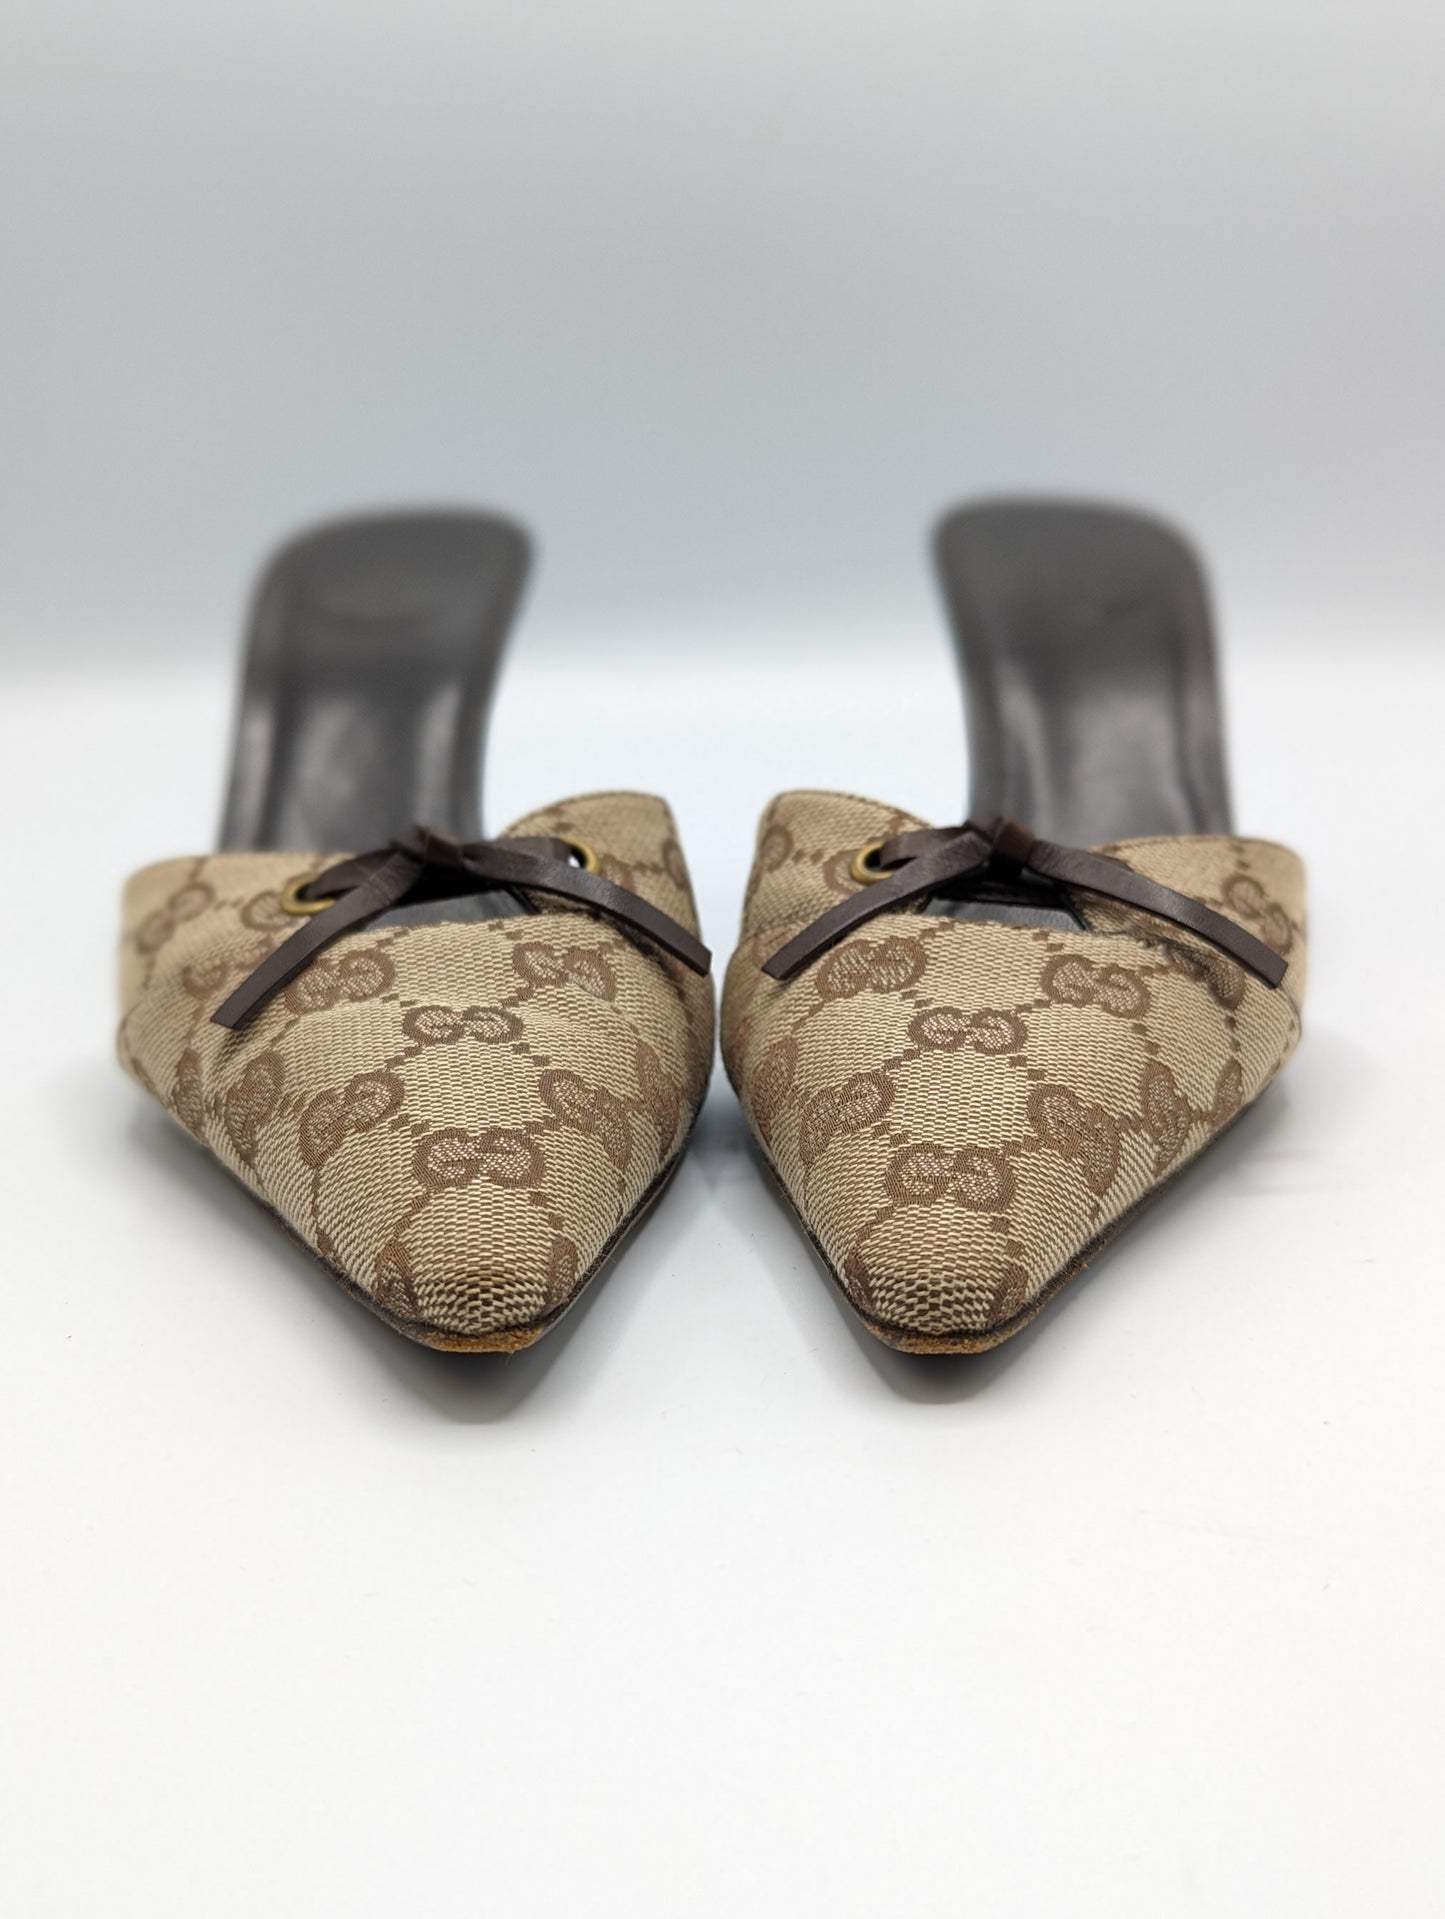 Gucci Monogram Pointed Mules Size 9